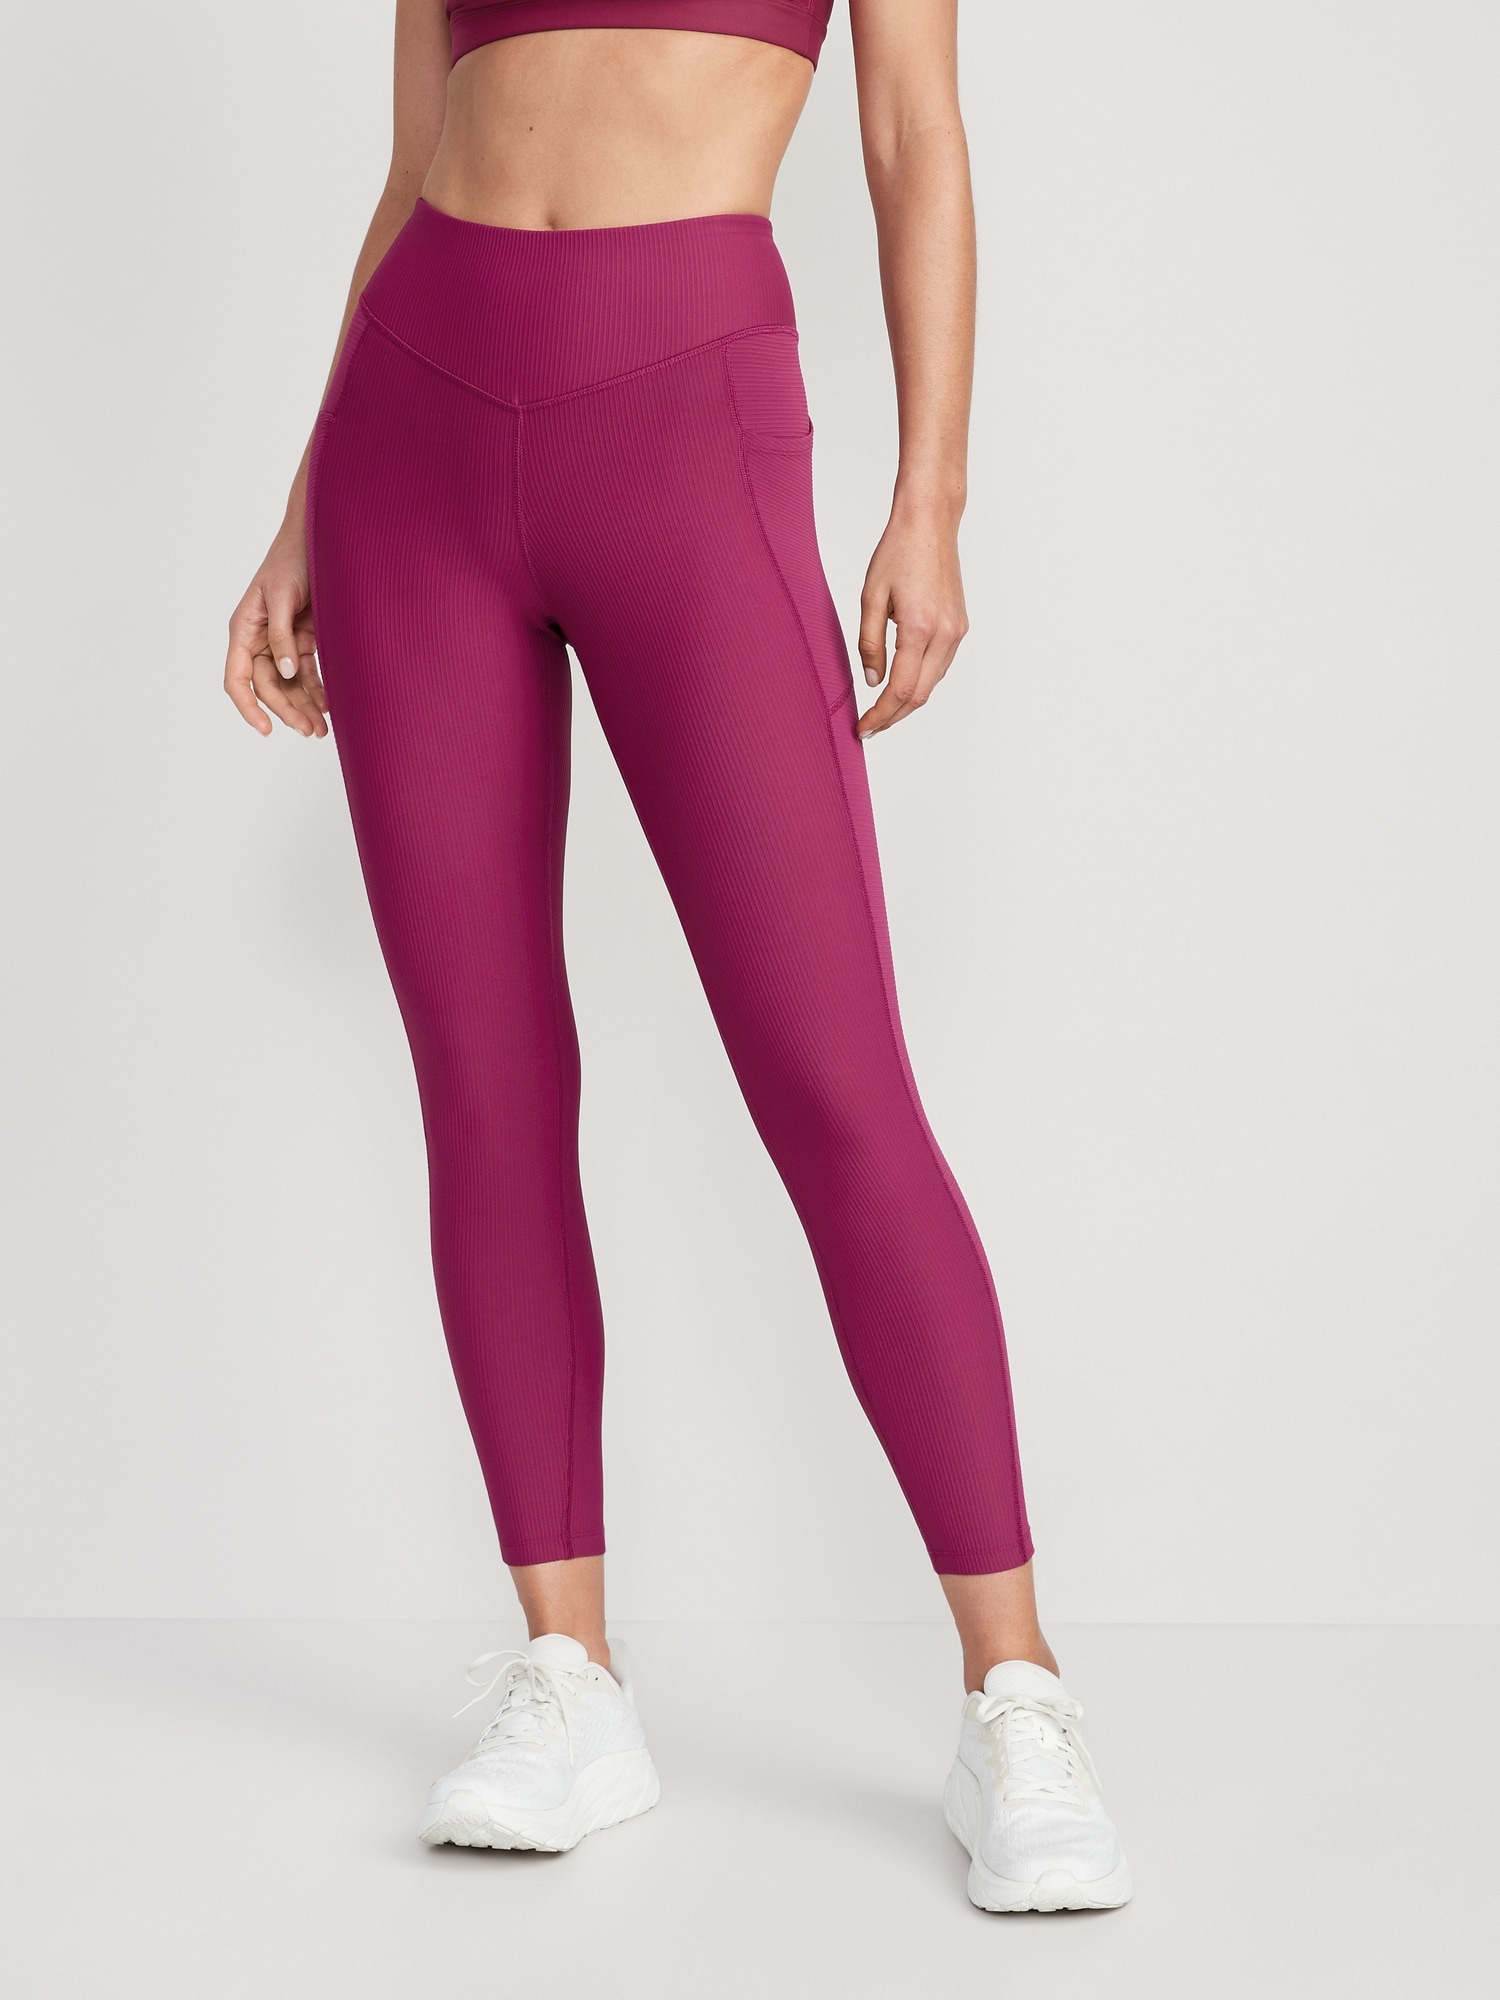 Old Navy High-Waisted PowerSoft Rib-Knit Side-Pocket 7/8-Length Leggings for Women pink. 1